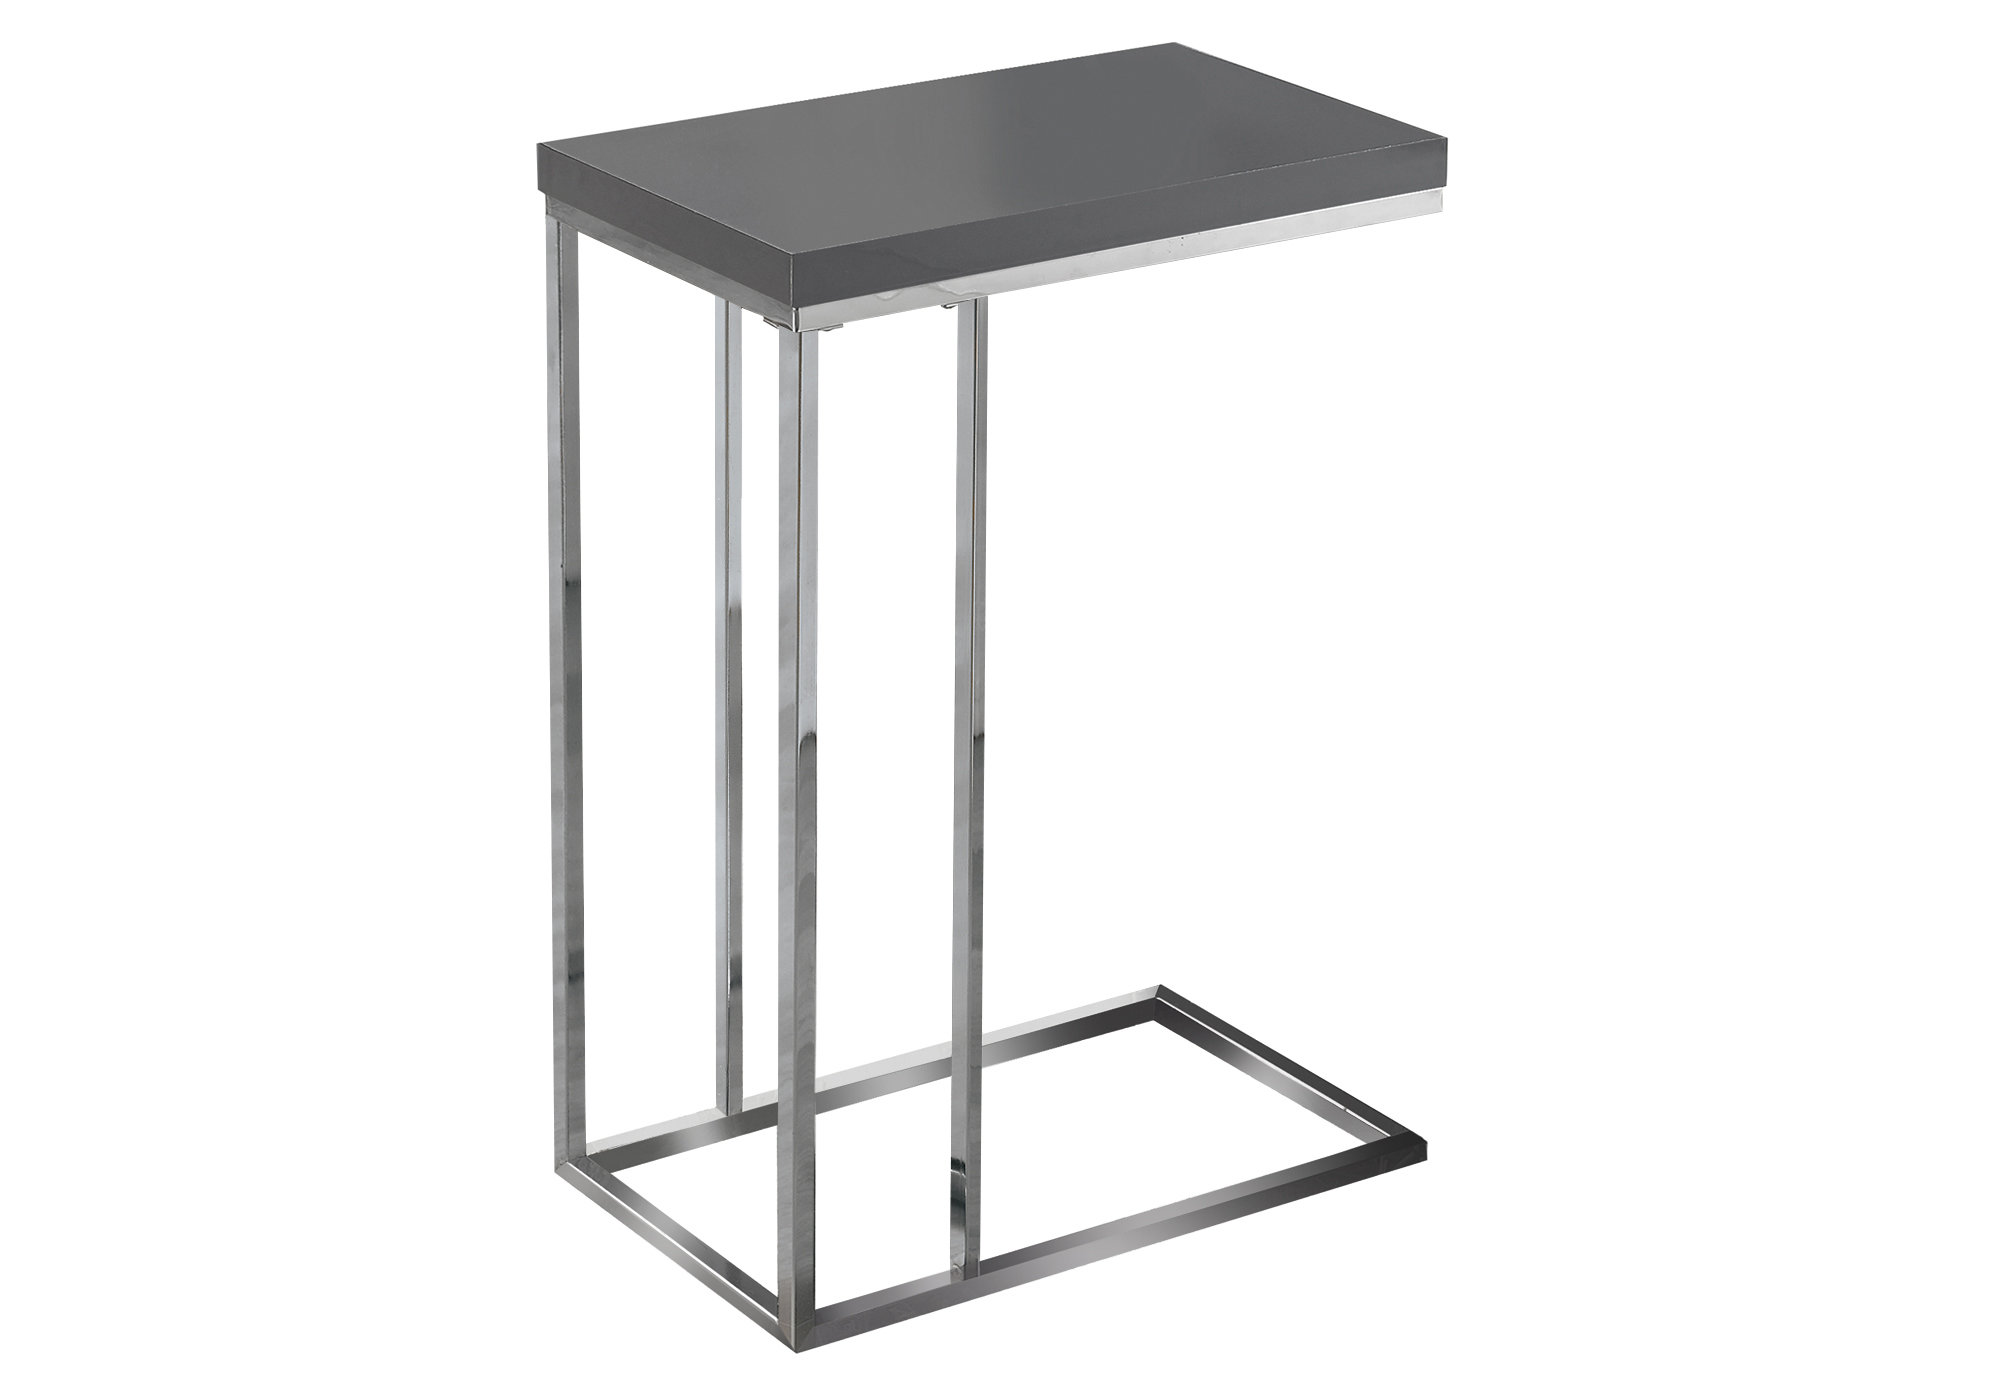 18.25" x 10.25" x 25.25" Grey Particle Board Metal Accent Table